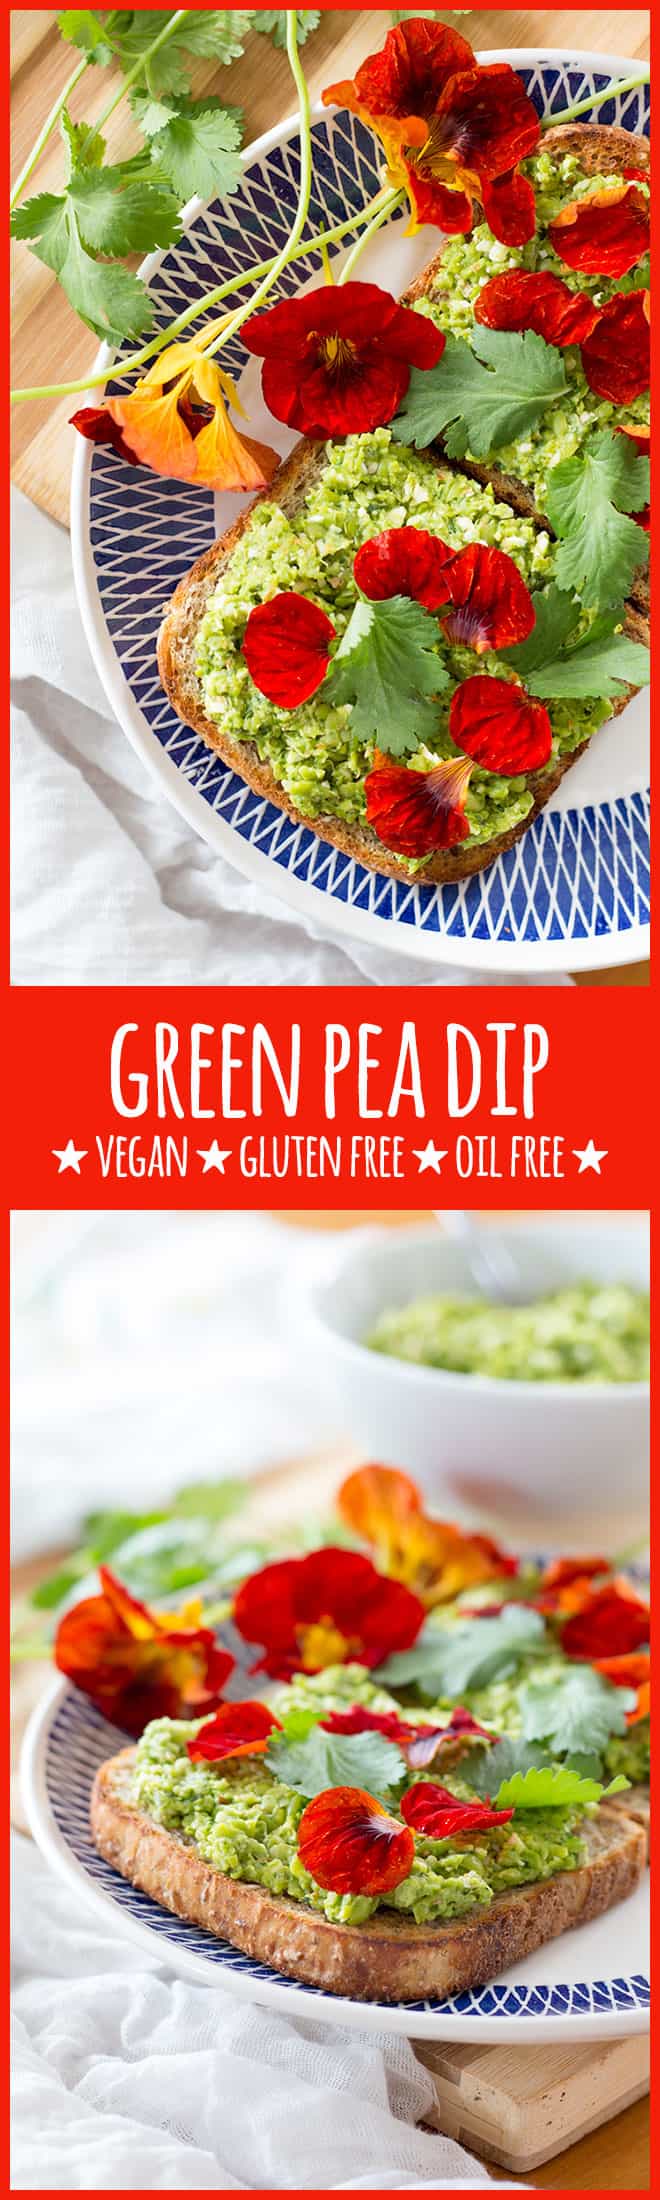 This simple, fresh and tasty dip featuring green peas, coriander and almonds is cheap and can be on the table in under 10 minutes.